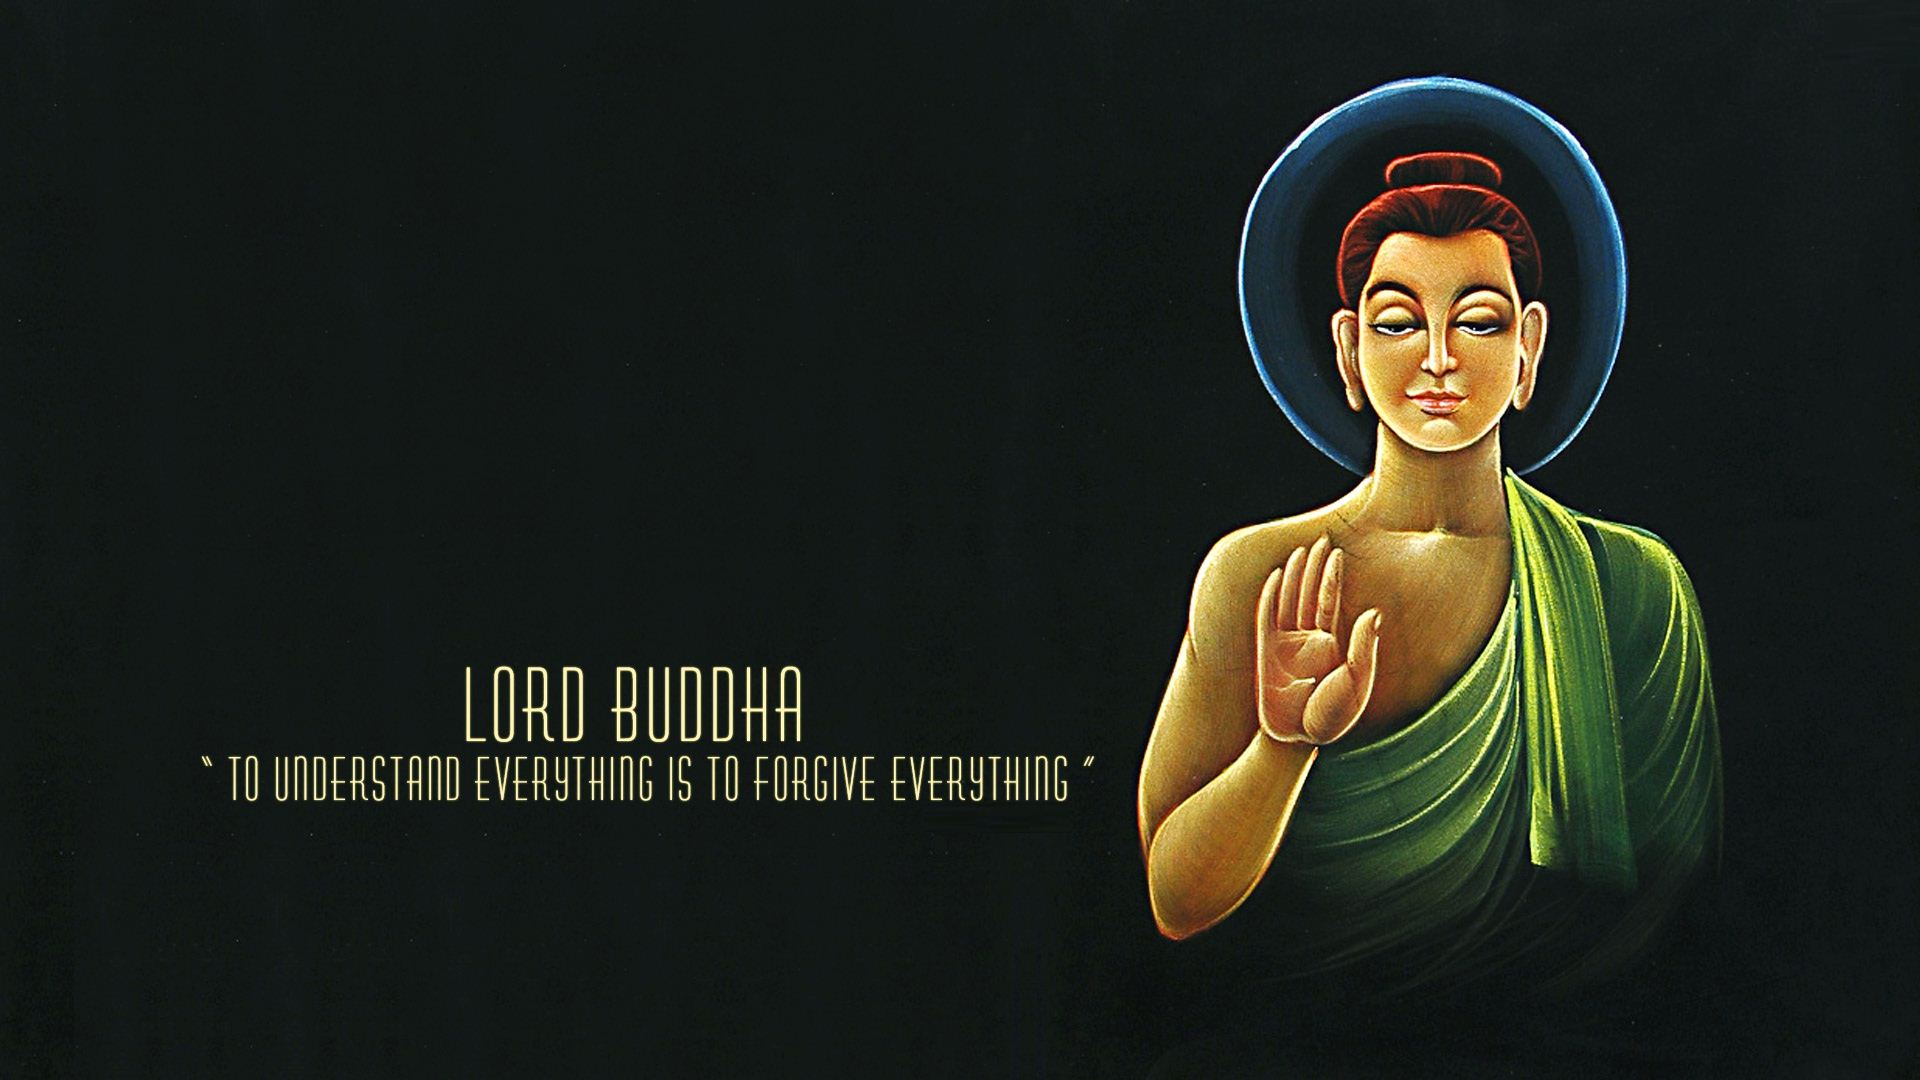 Free Download Buddha Wallpaper Mixhd Wallpapers 1920x1080 For Your Desktop Mobile Tablet Explore 49 Buddhist Background Wallpaper Buddhist Images Wallpaper Buddha Images Wallpaper Buddhist Wallpaper Desktop